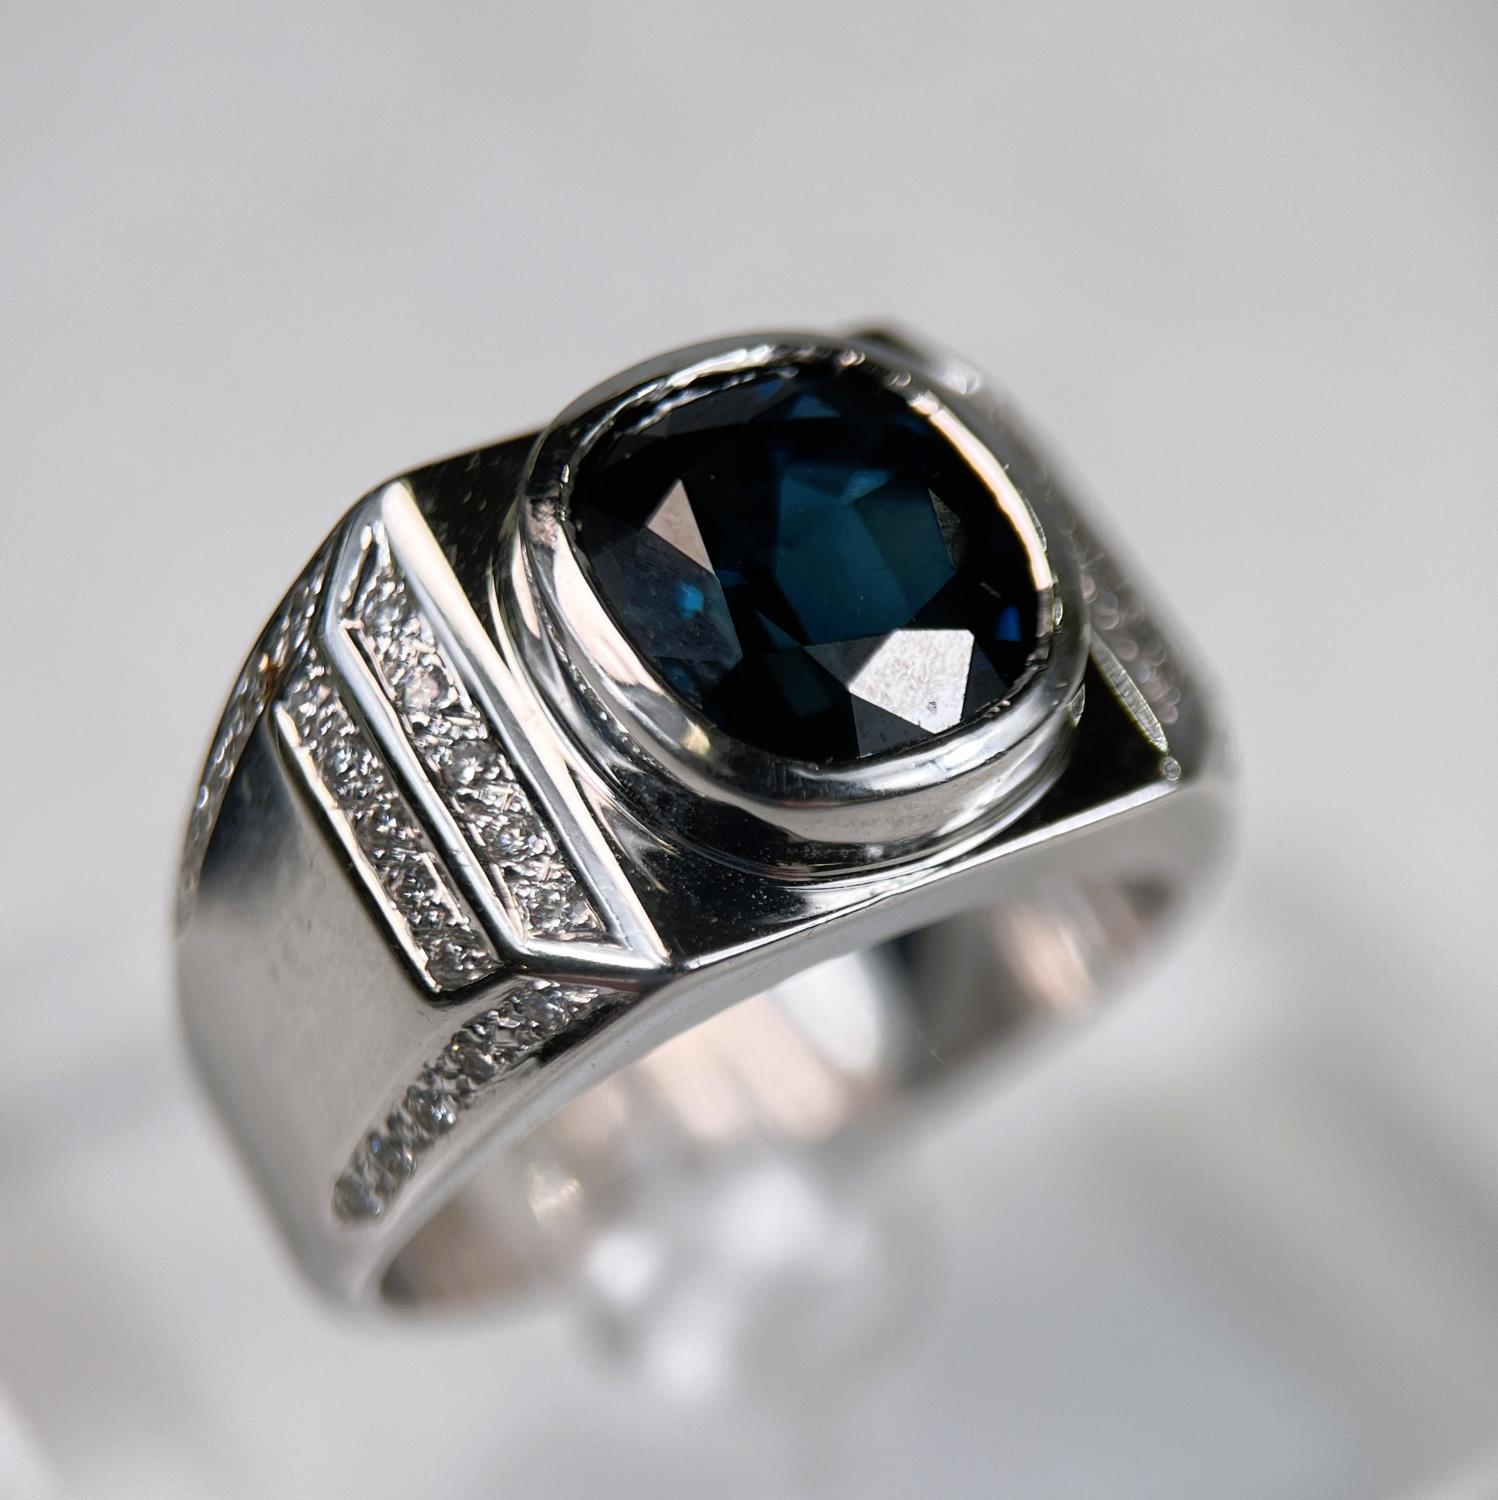 A gent's heavy dress ring with wide white metal shank set central cushion cut sapphire (10.5 x 9.